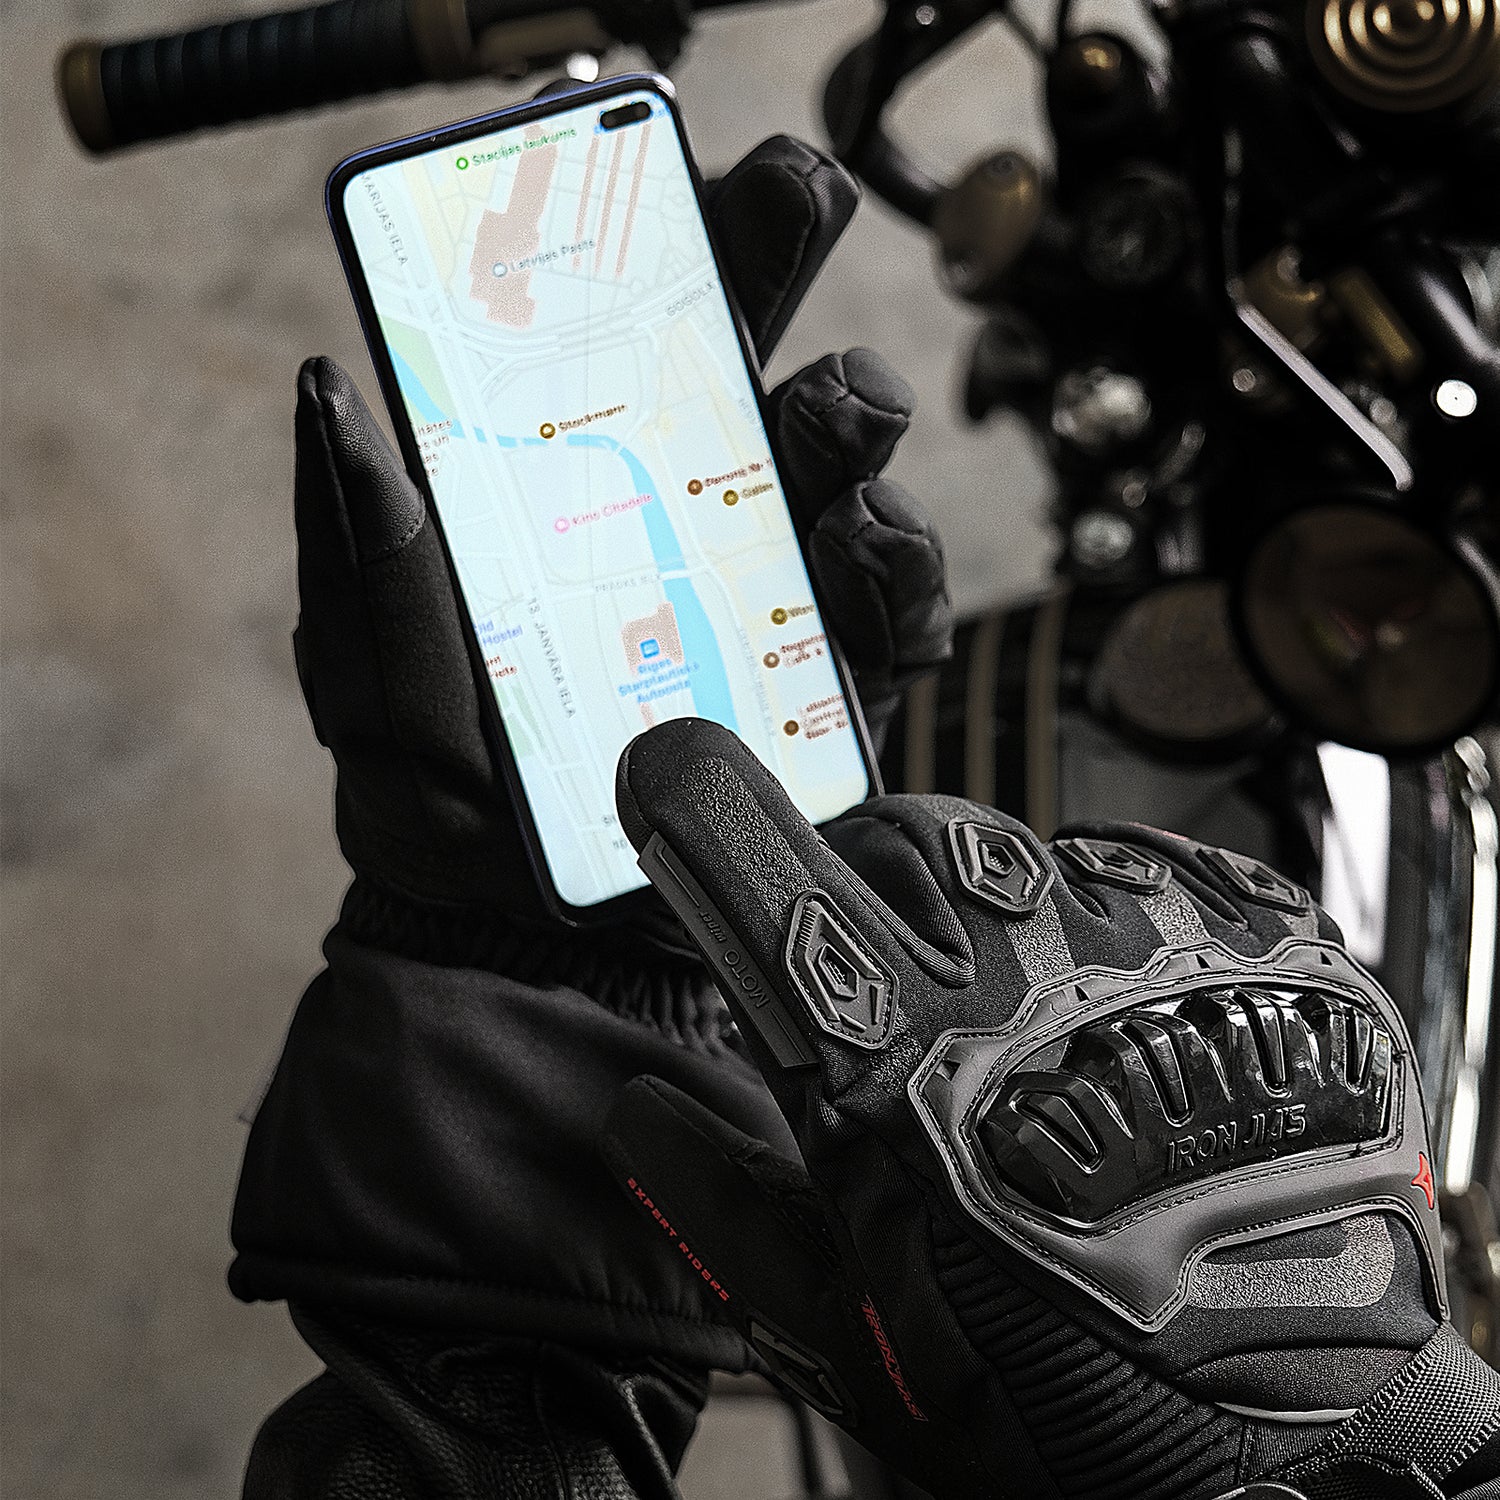 IRON JIA'S Motorcycle Gloves, Winter Riding Gloves with Touchscreen, 3M  Thinsulate Thermal Waterproof Windproof Gloves for Road Racing, Cycling,  Ebike